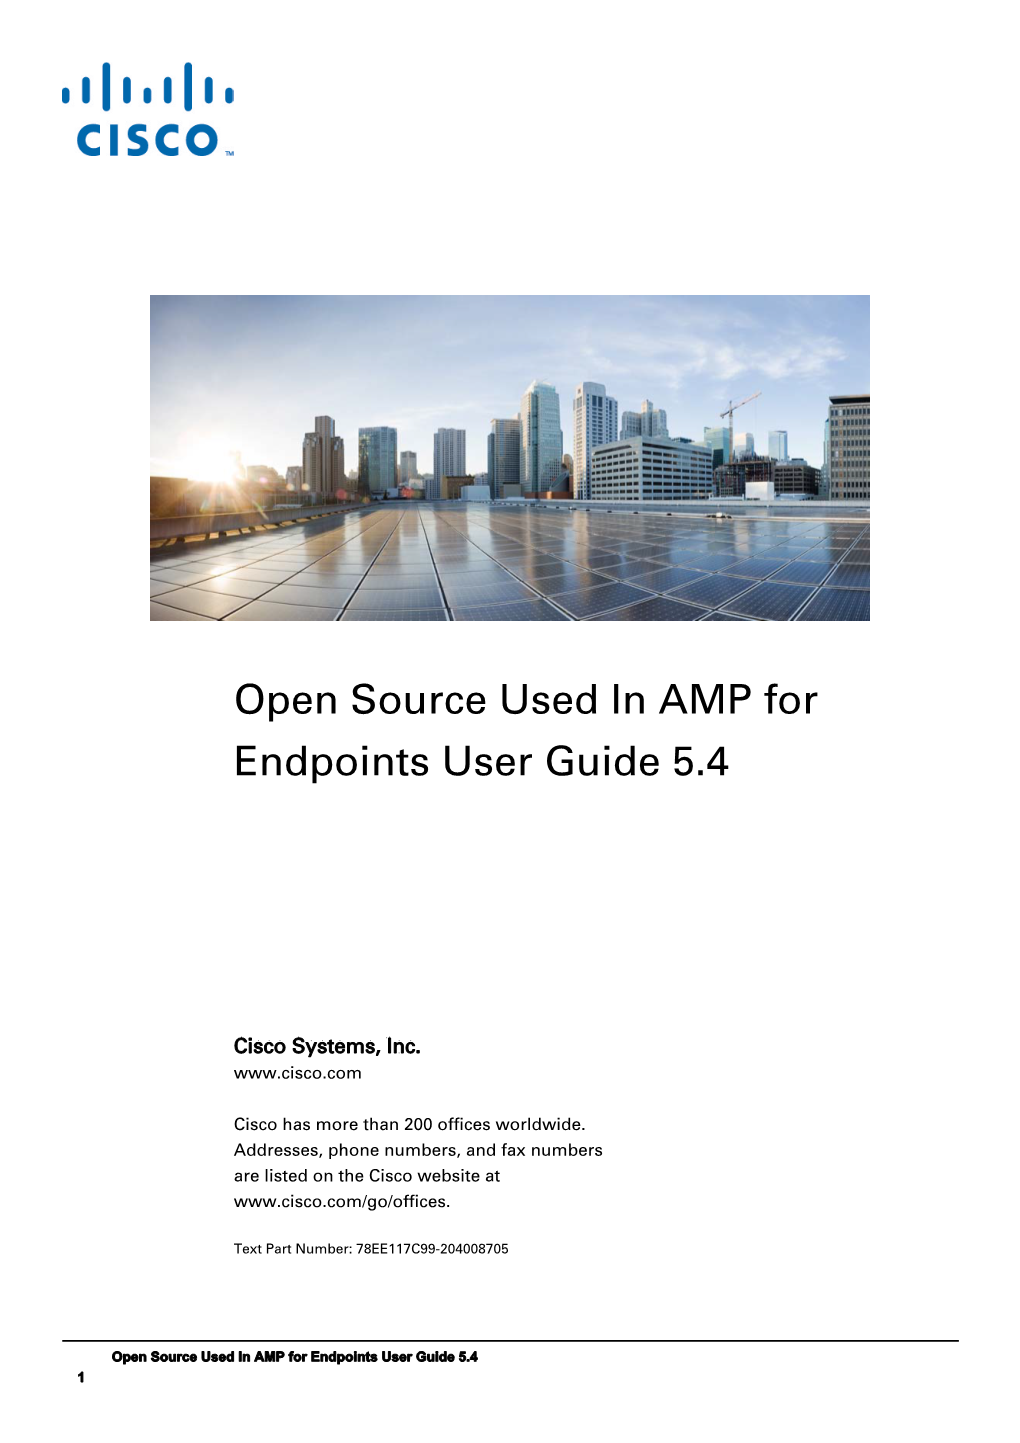 Open Source Used in AMP for Endpoints User Guide 5.4